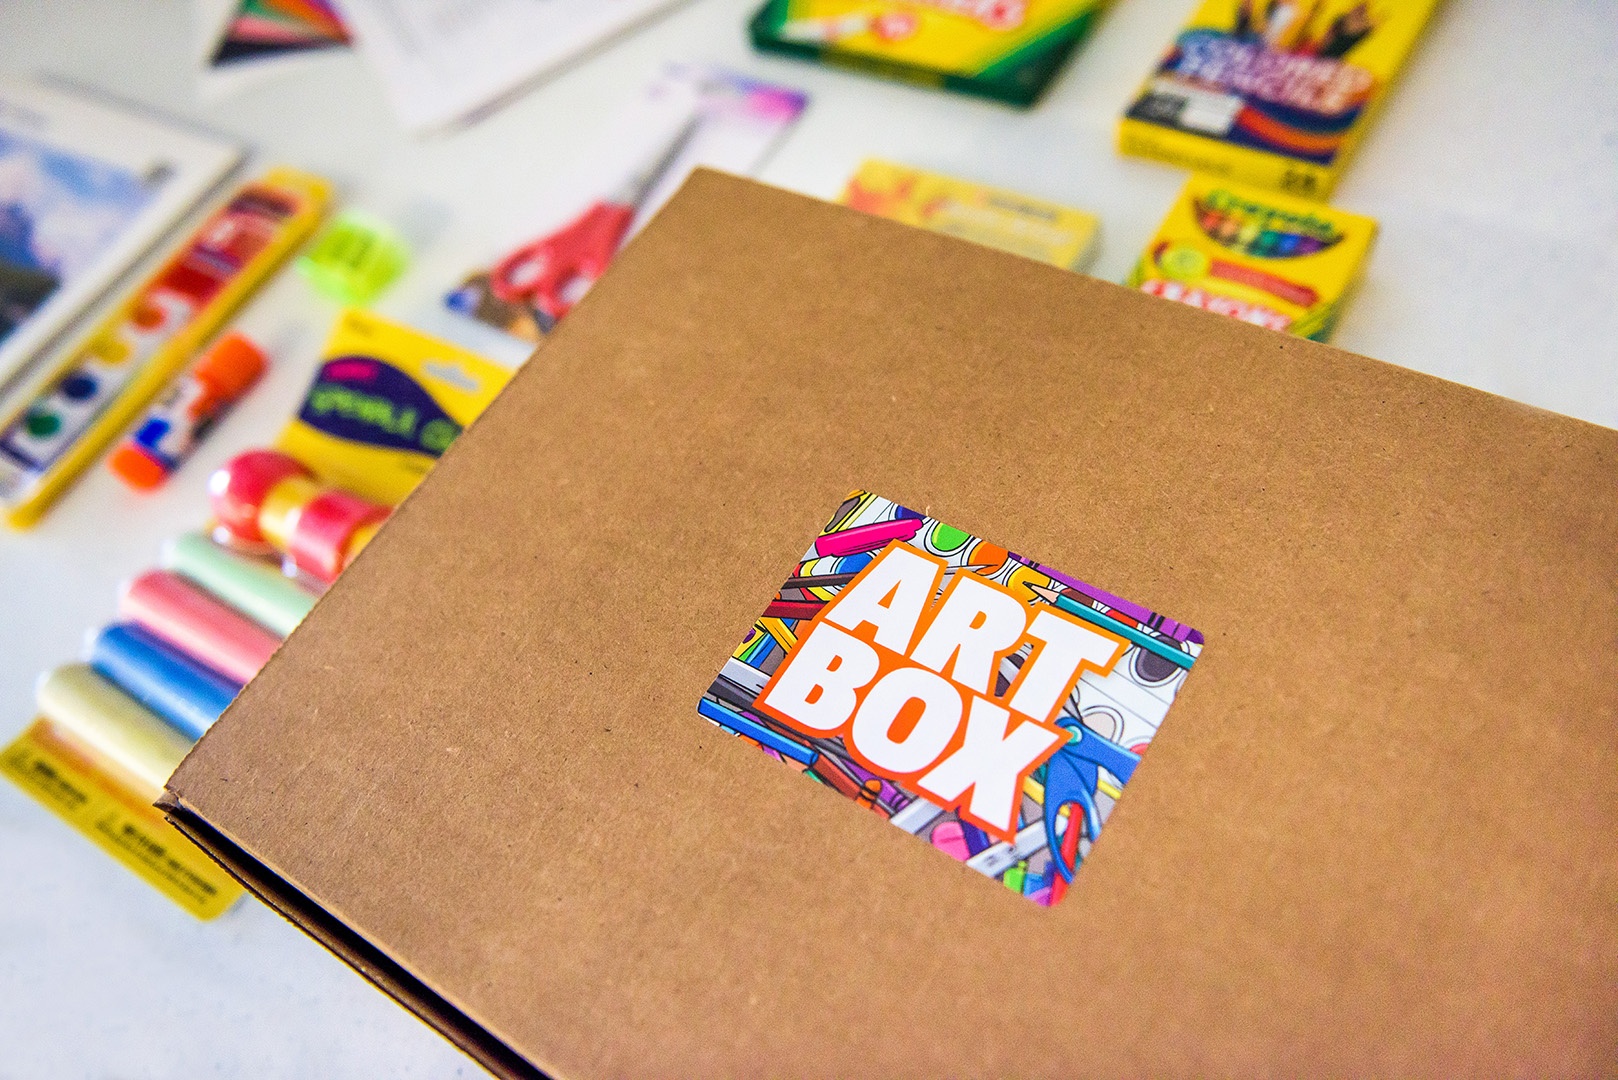 Ann Arbor Art Center selling, donating ‘Artbox’ to foster creativity at home